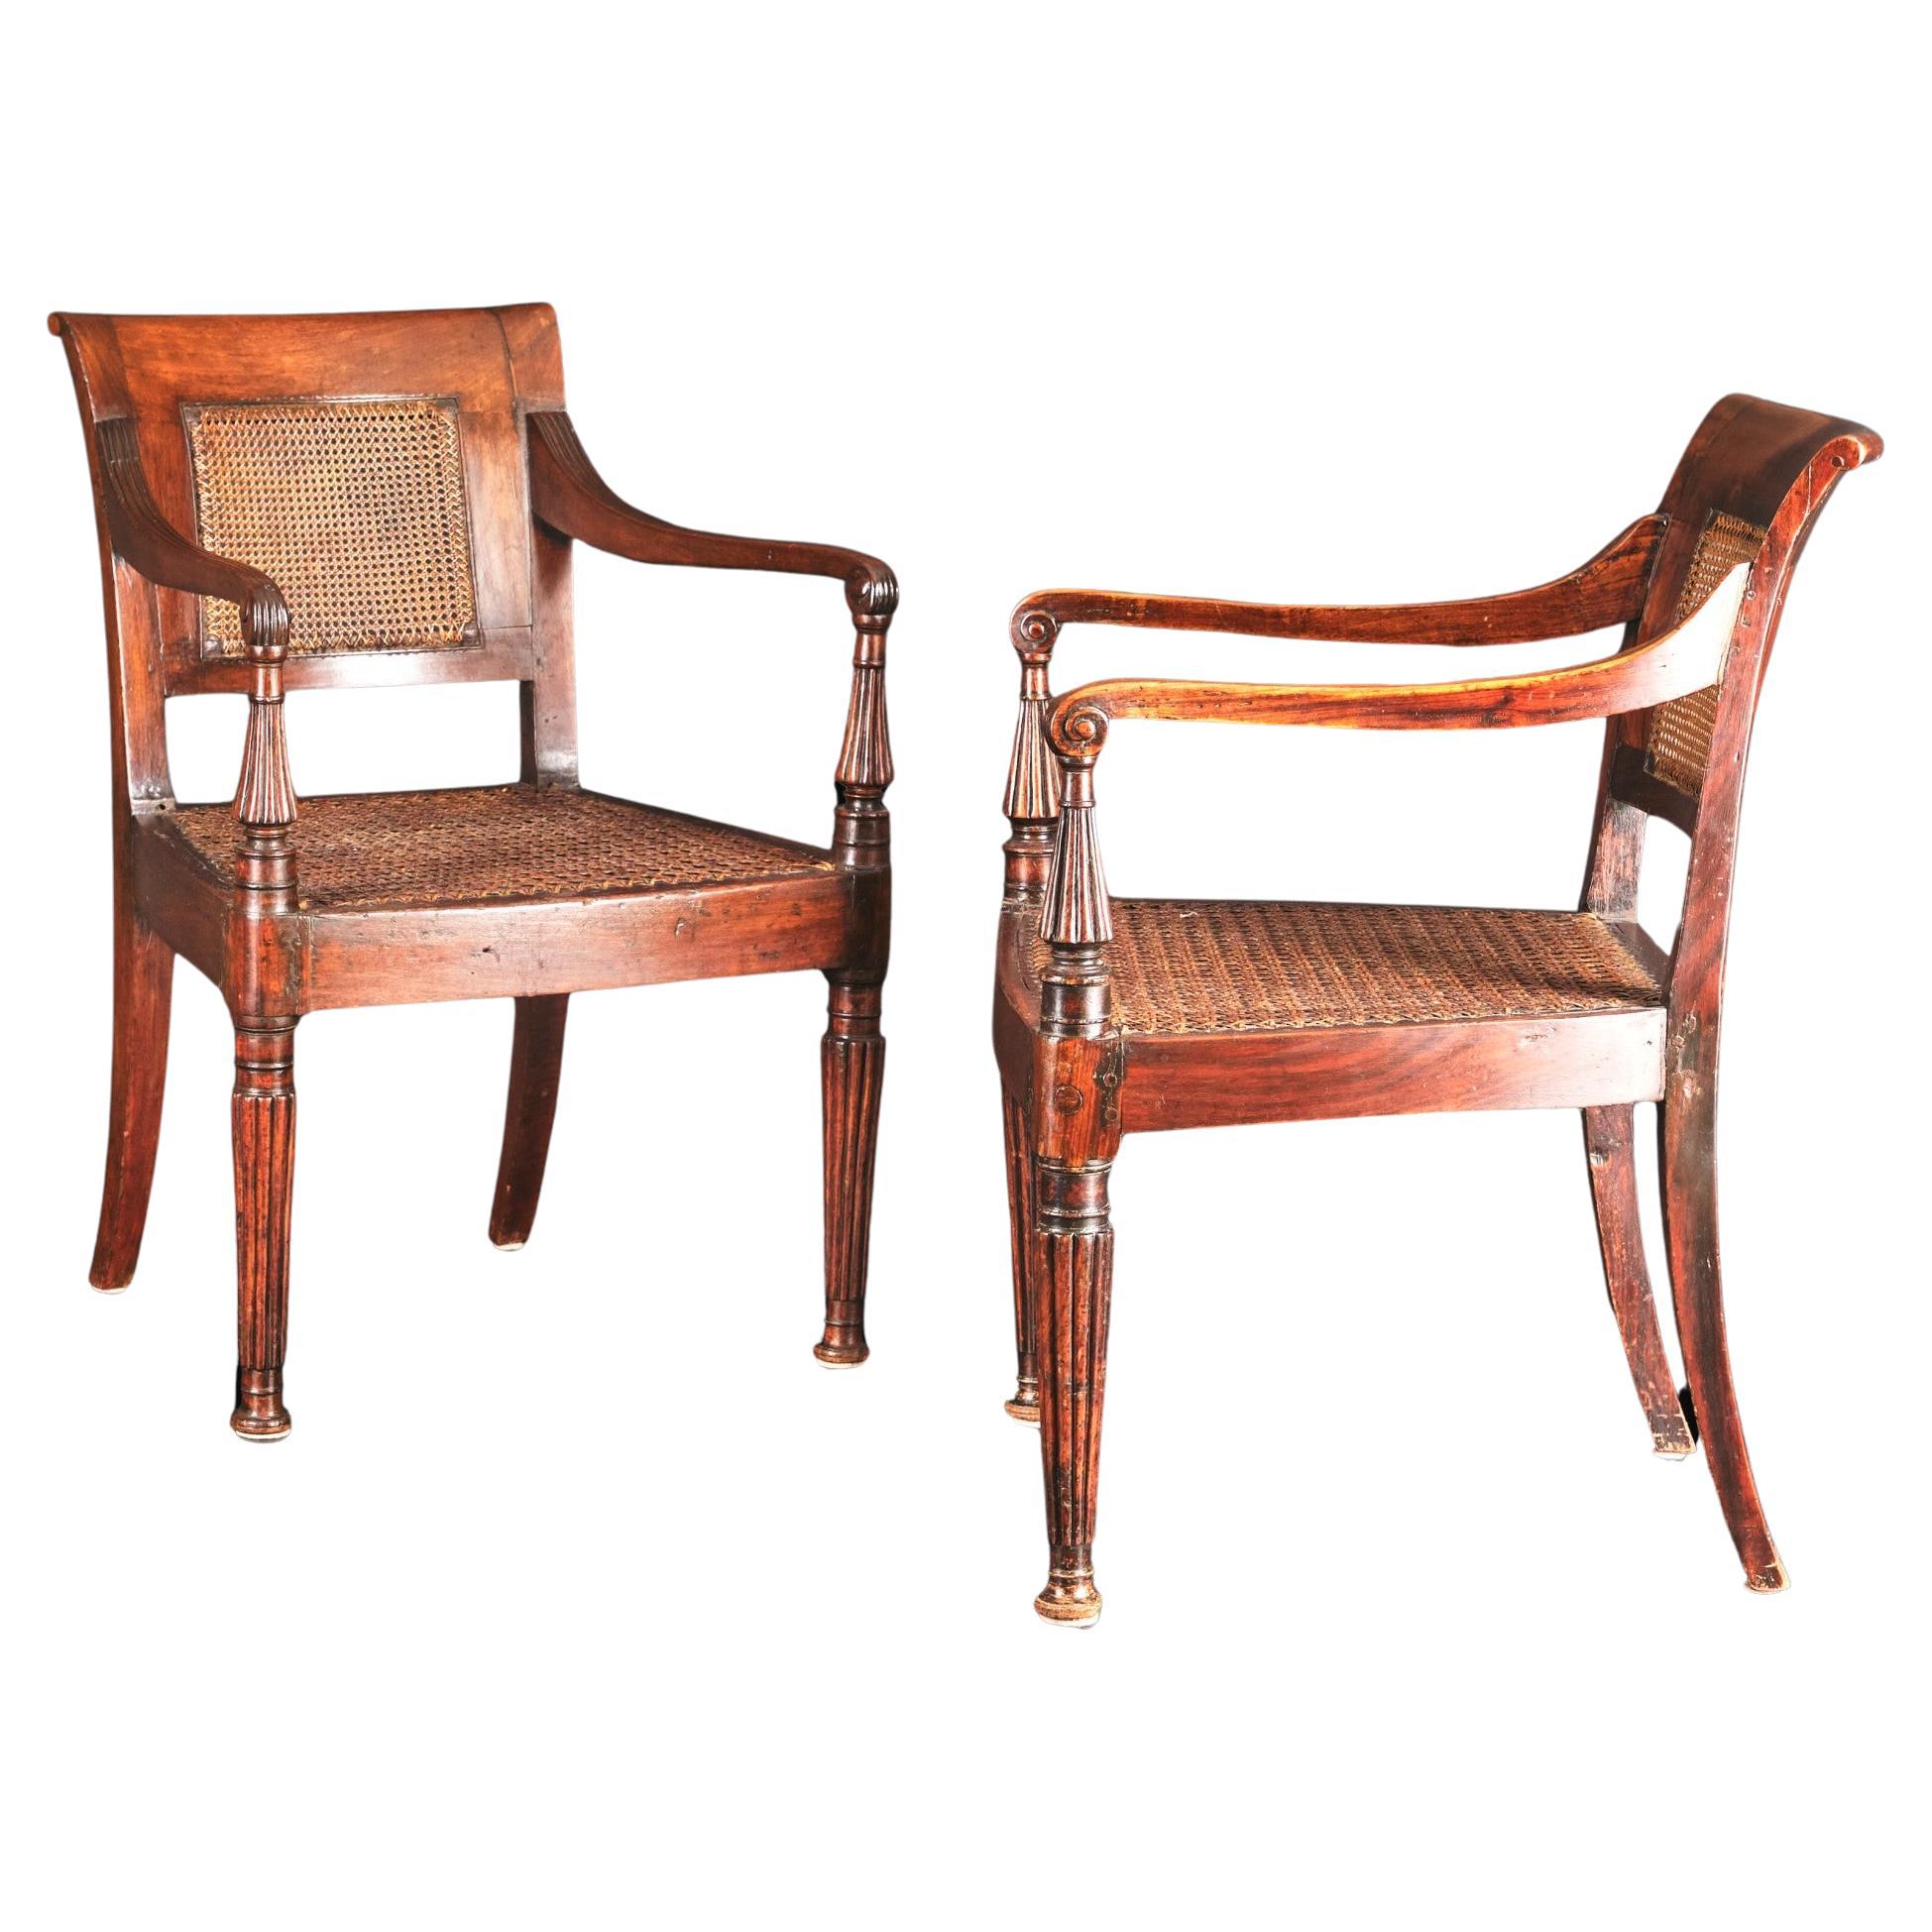 A Handsome Pair of 19th Century Anglo-Indian Padouk Wood Armchairs, Circa 1830